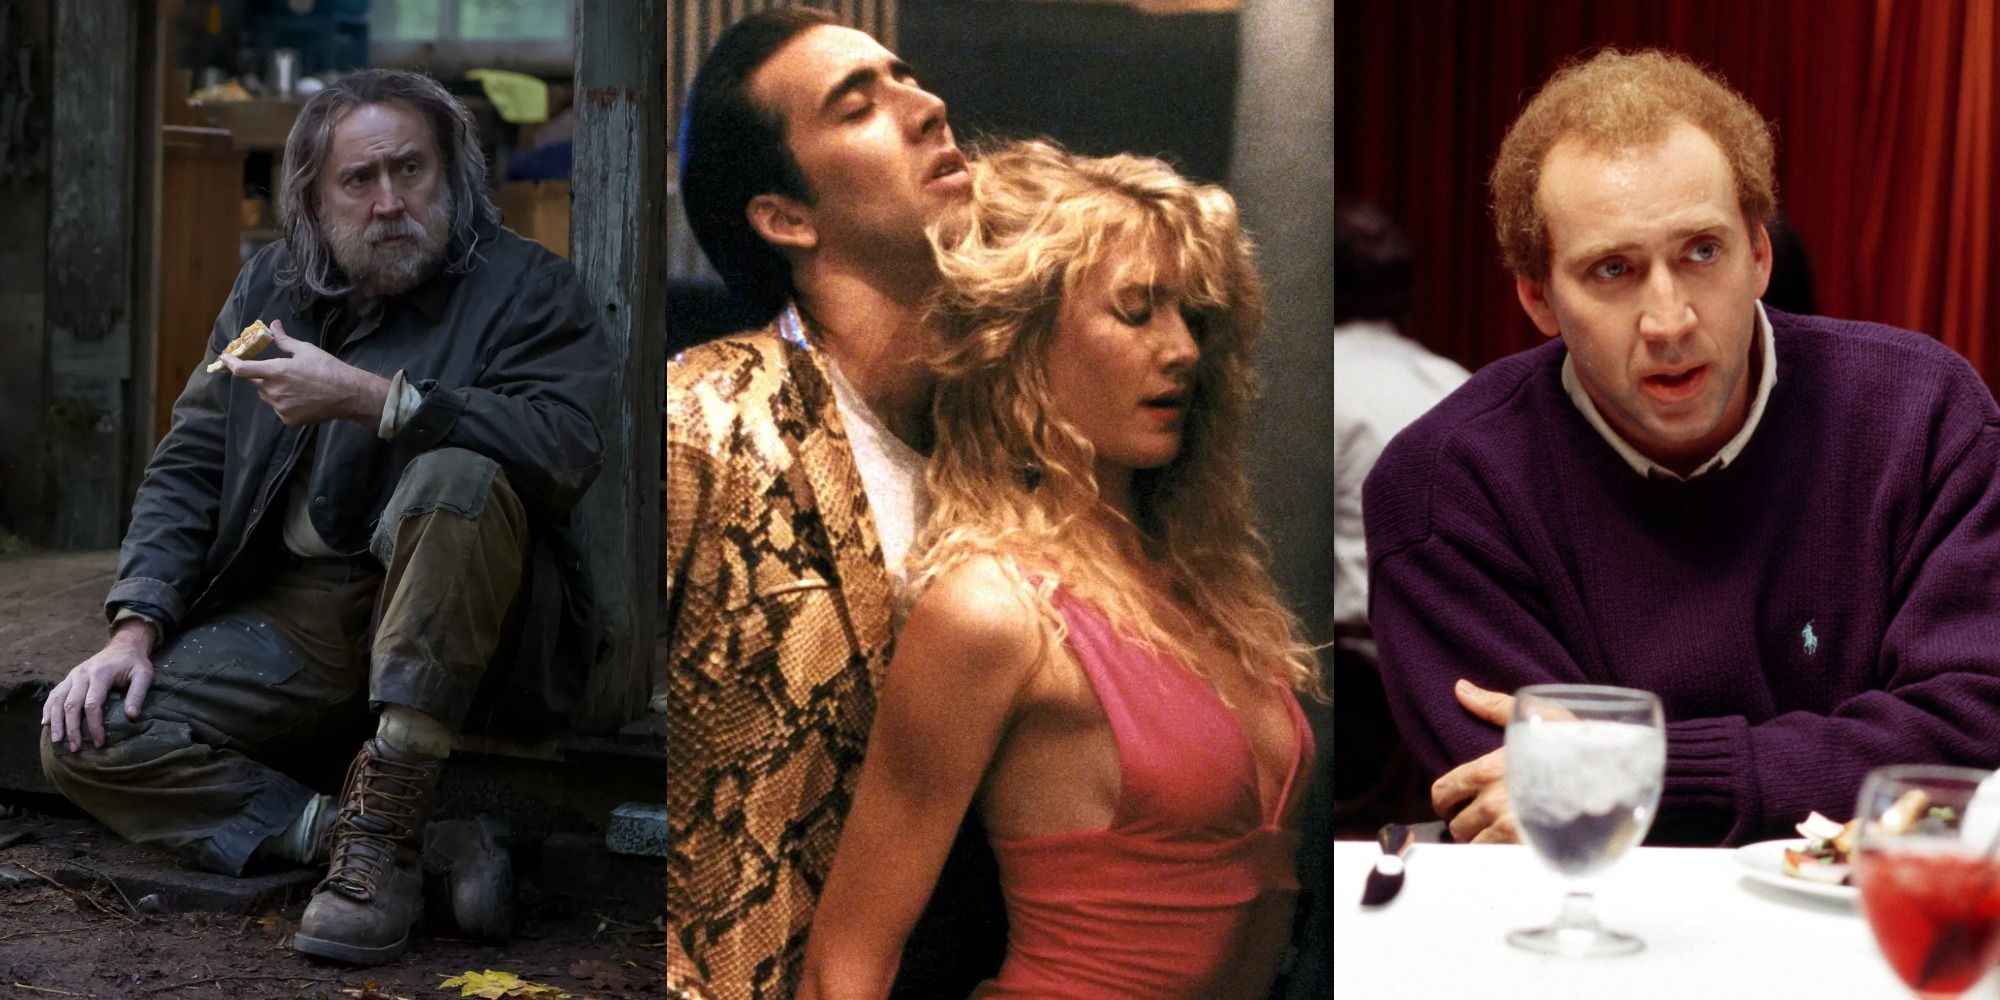 Nicolas Cage in Pig, Wild at Heart, and Adapation.